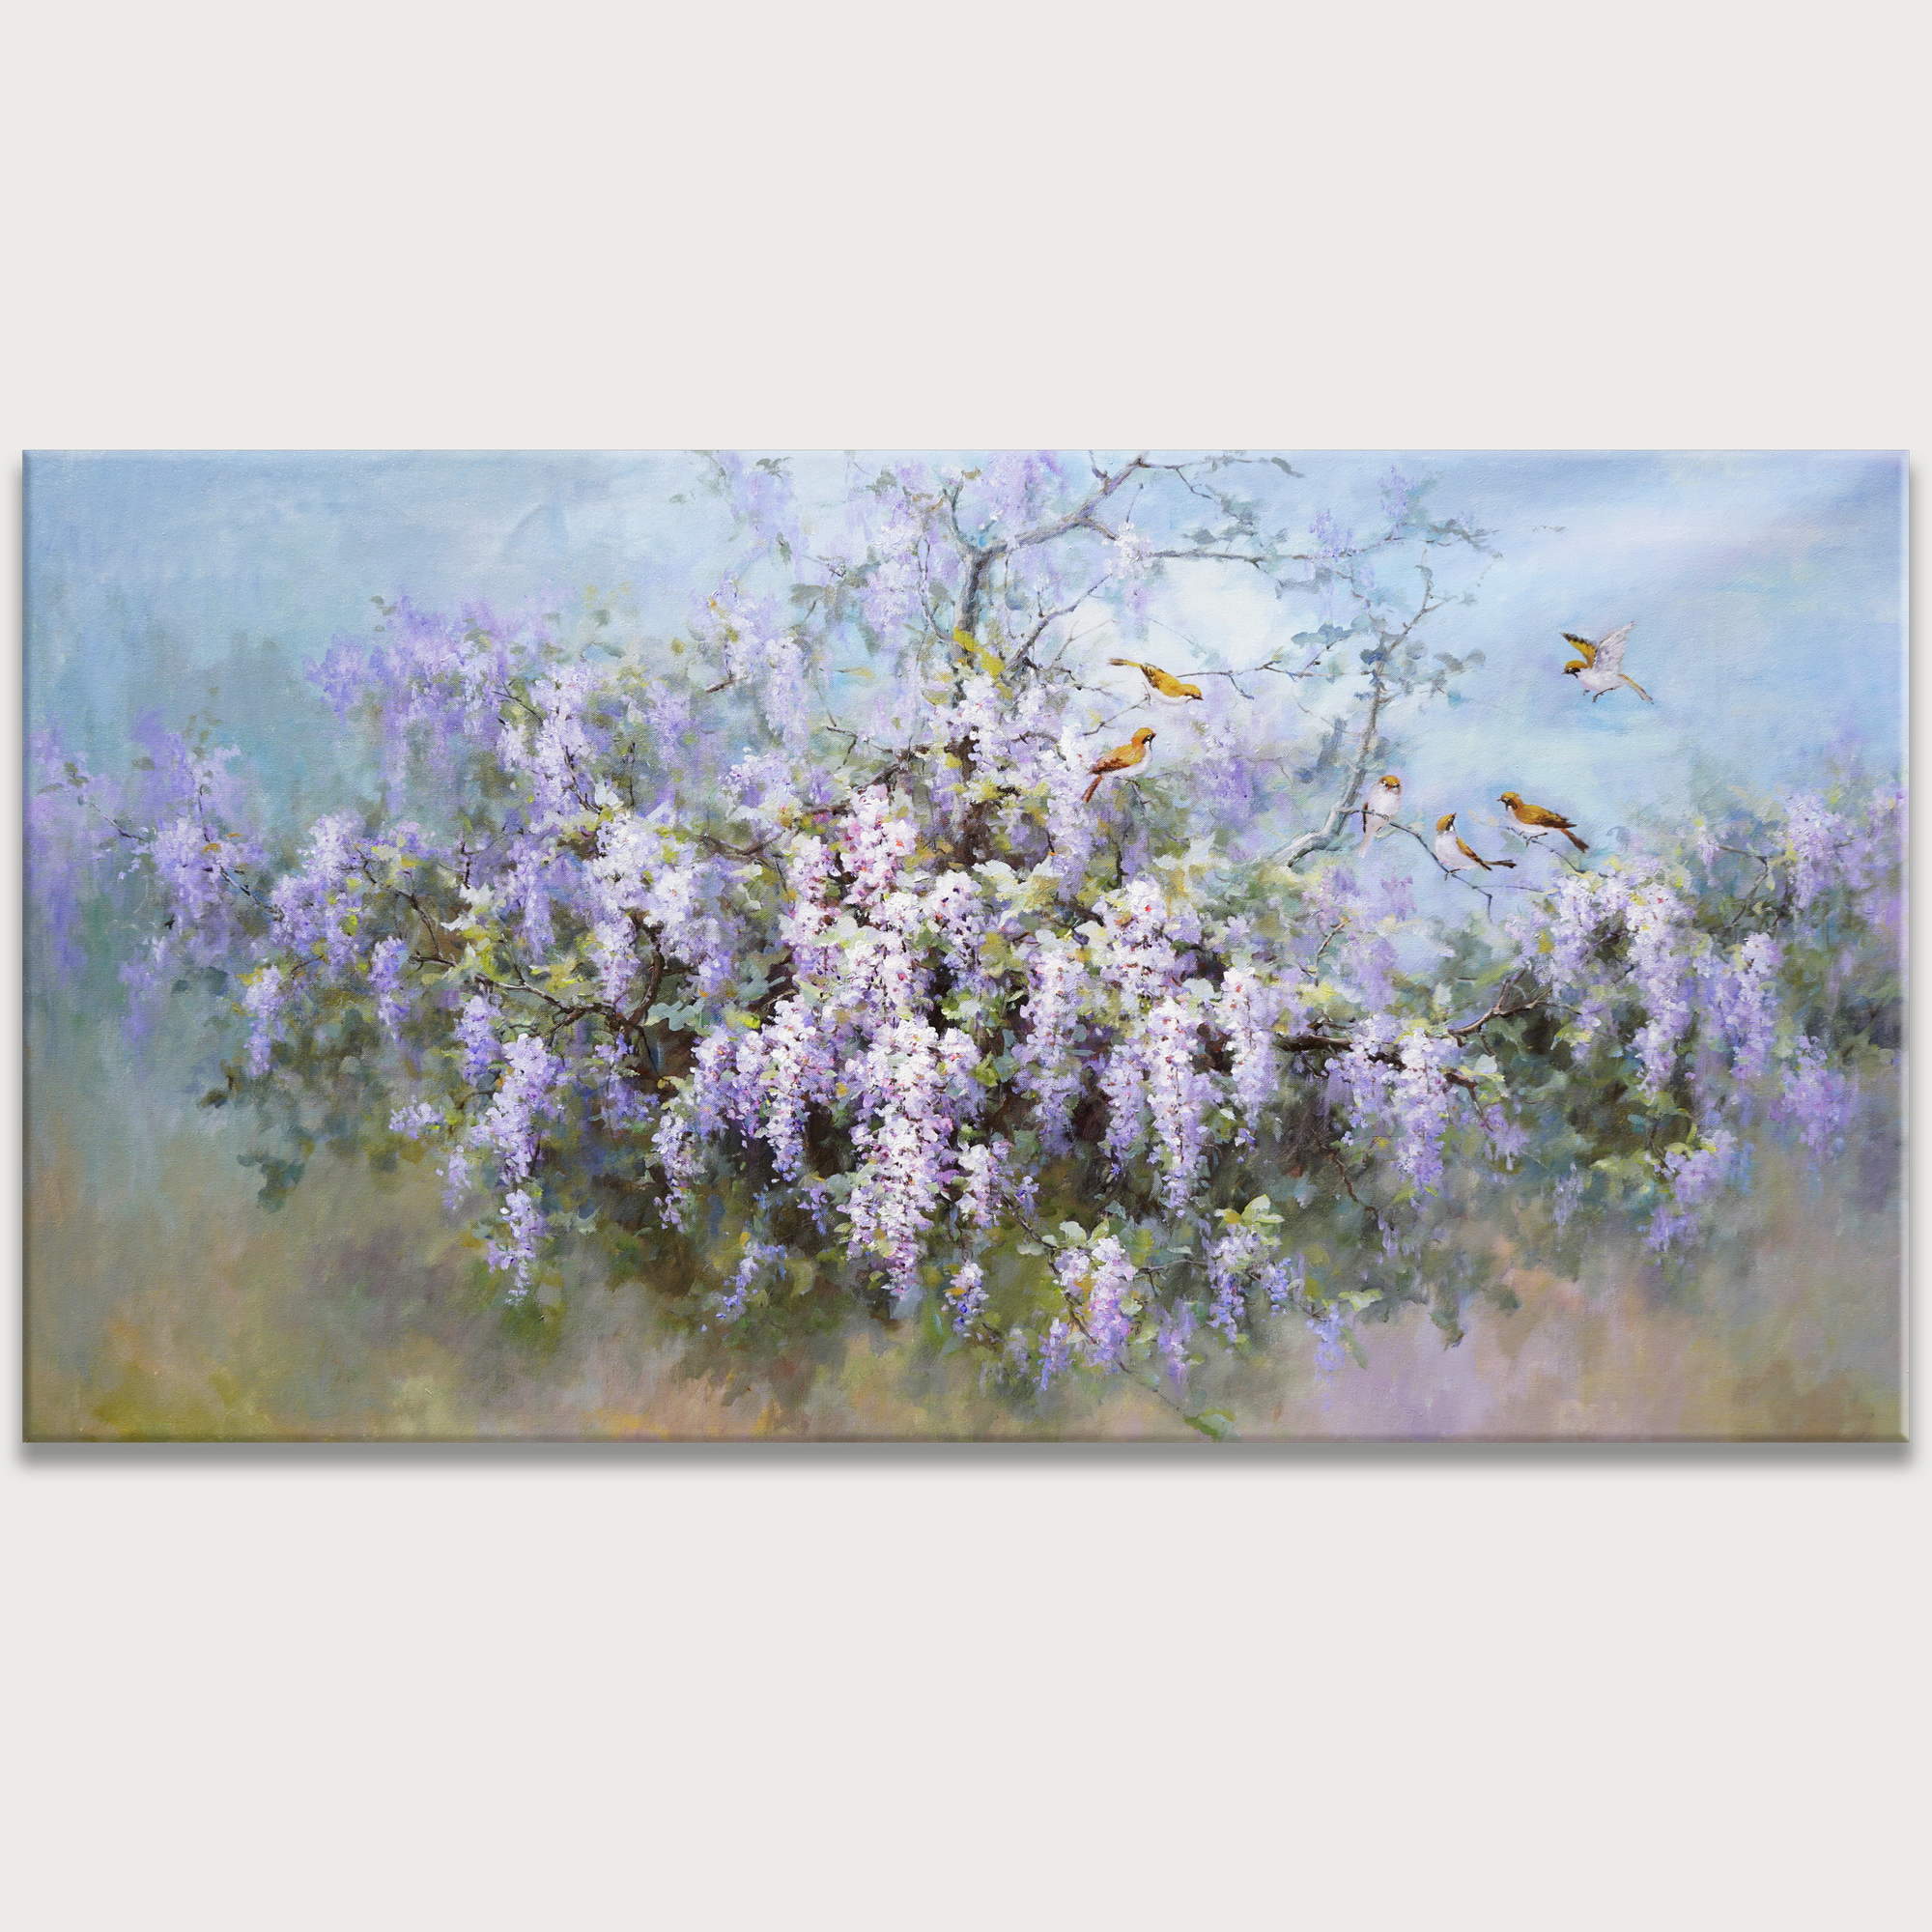 Hand painted Spring in Wisteria Blossom 90x180cm